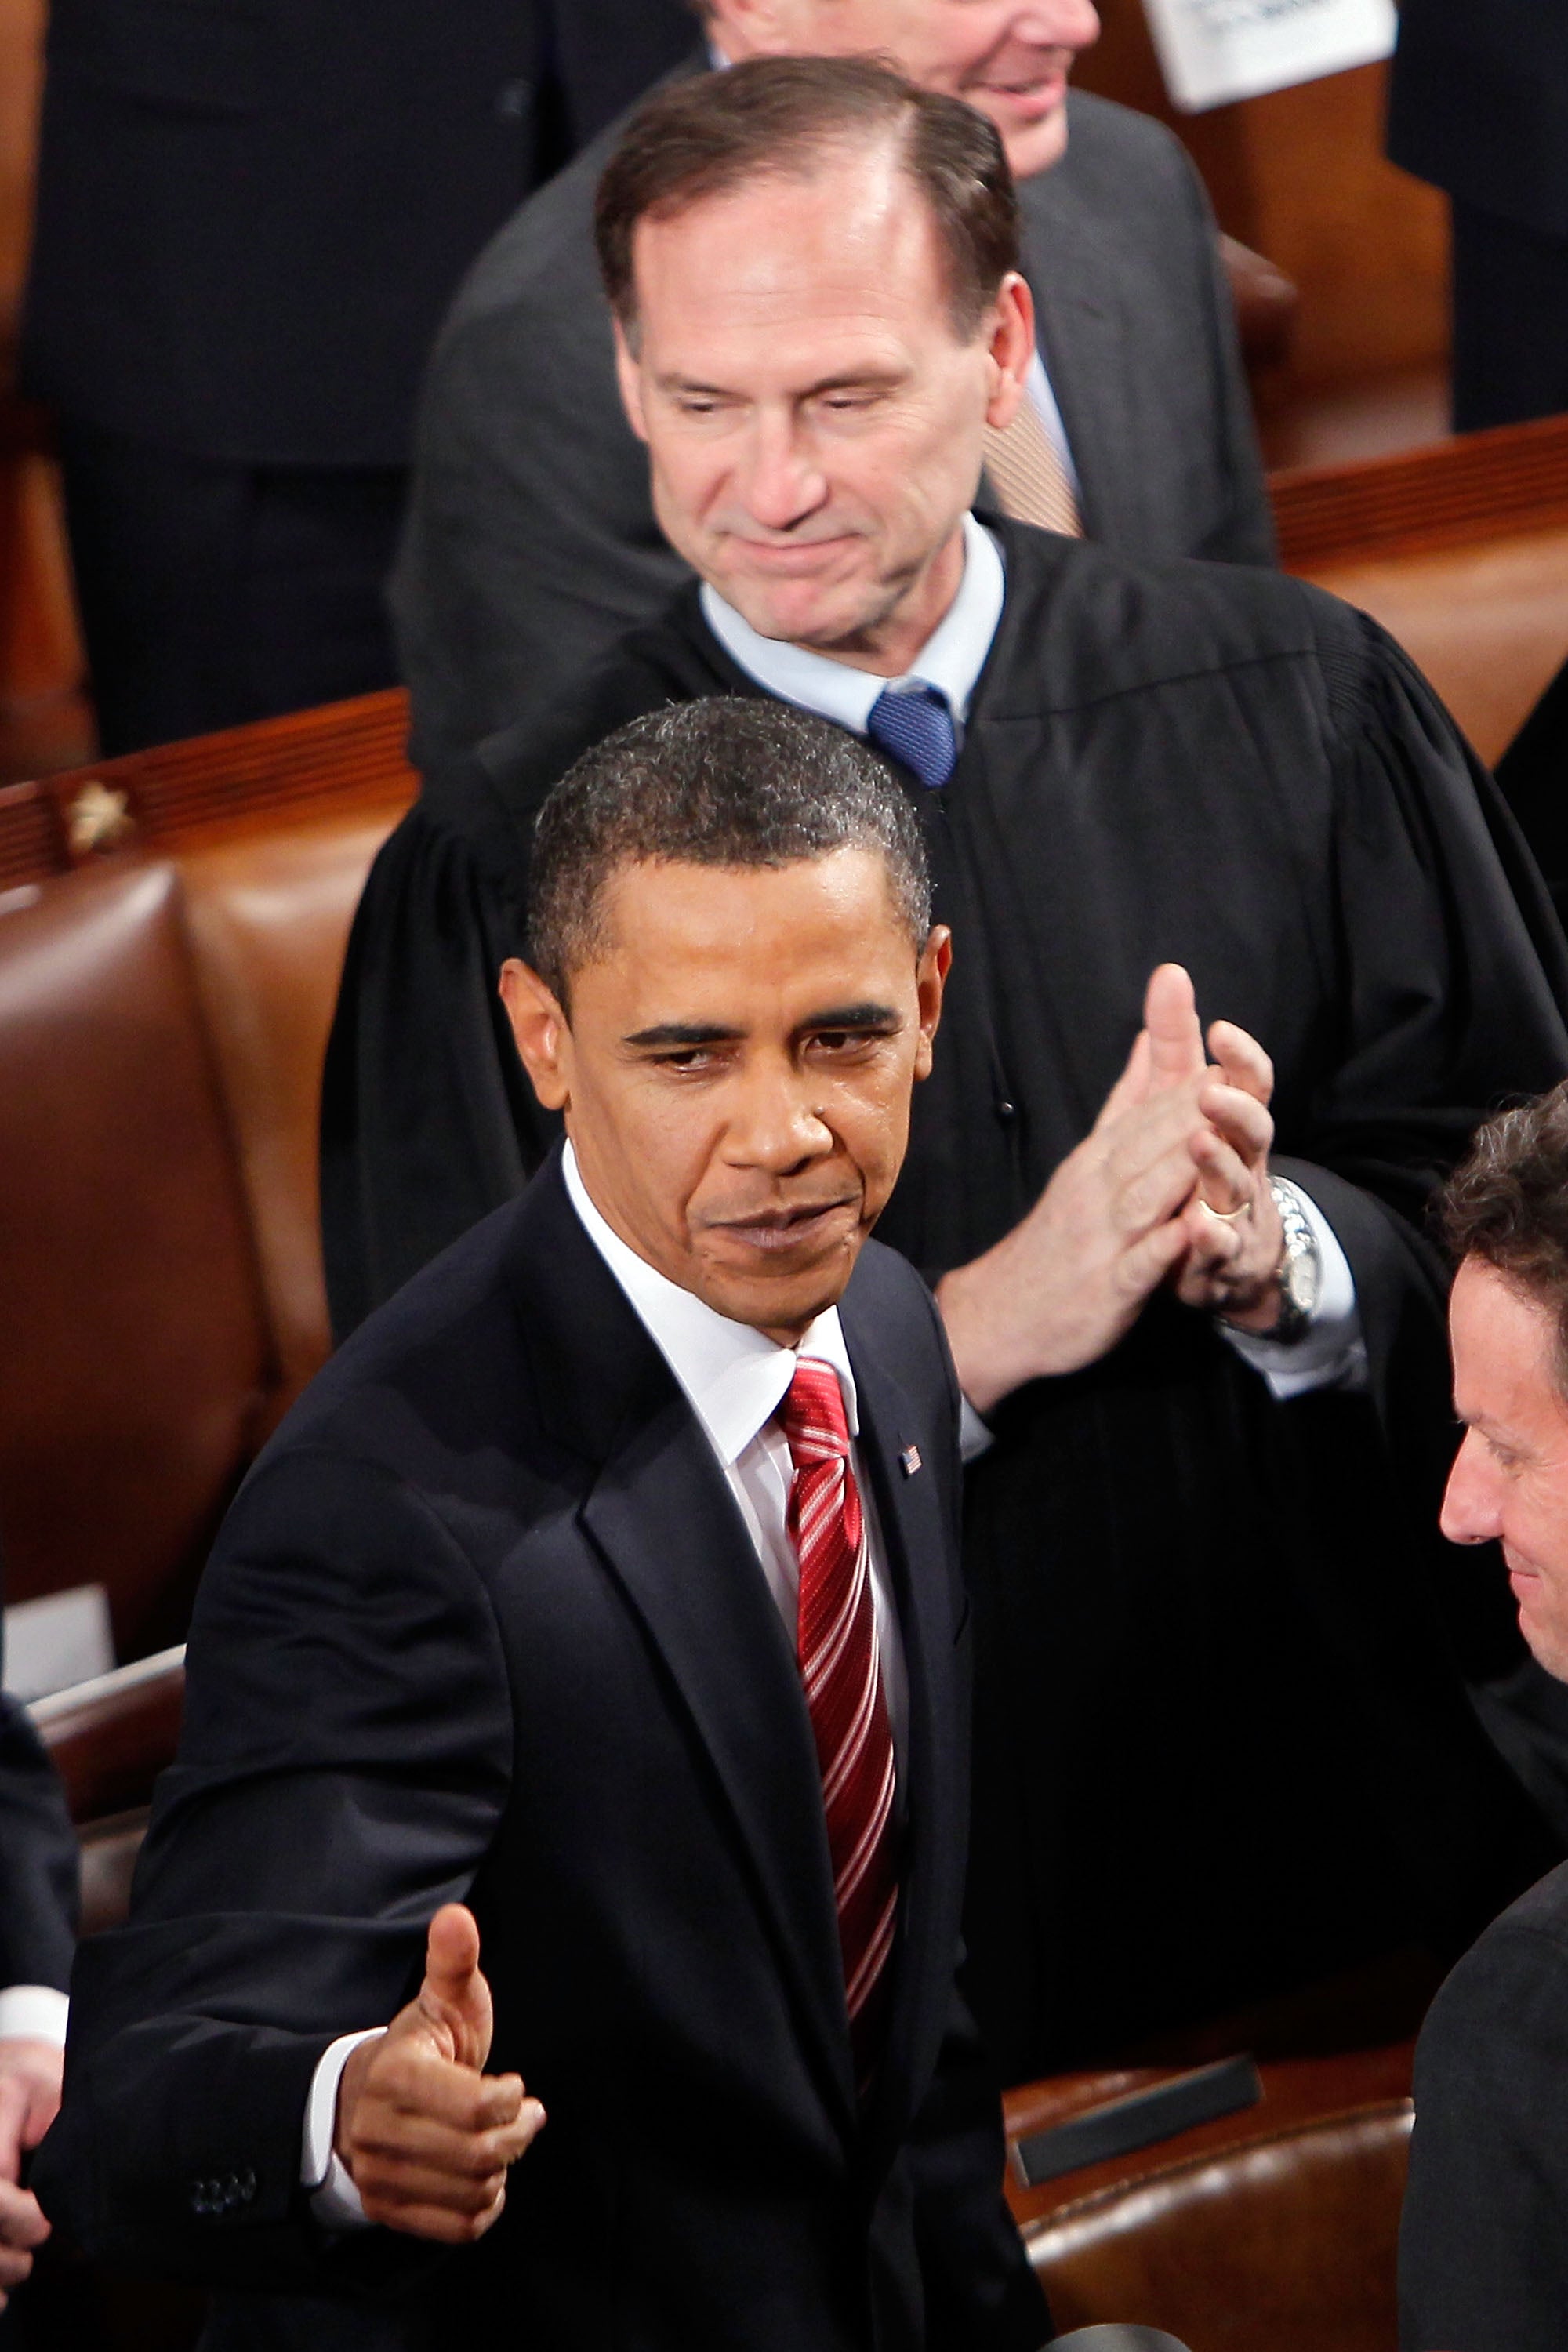 Supreme Court Justice Samuel Alito looks on on as U.S. President Barack Obama enters the chamber before speaking to both houses of Congress during his first State of the Union address